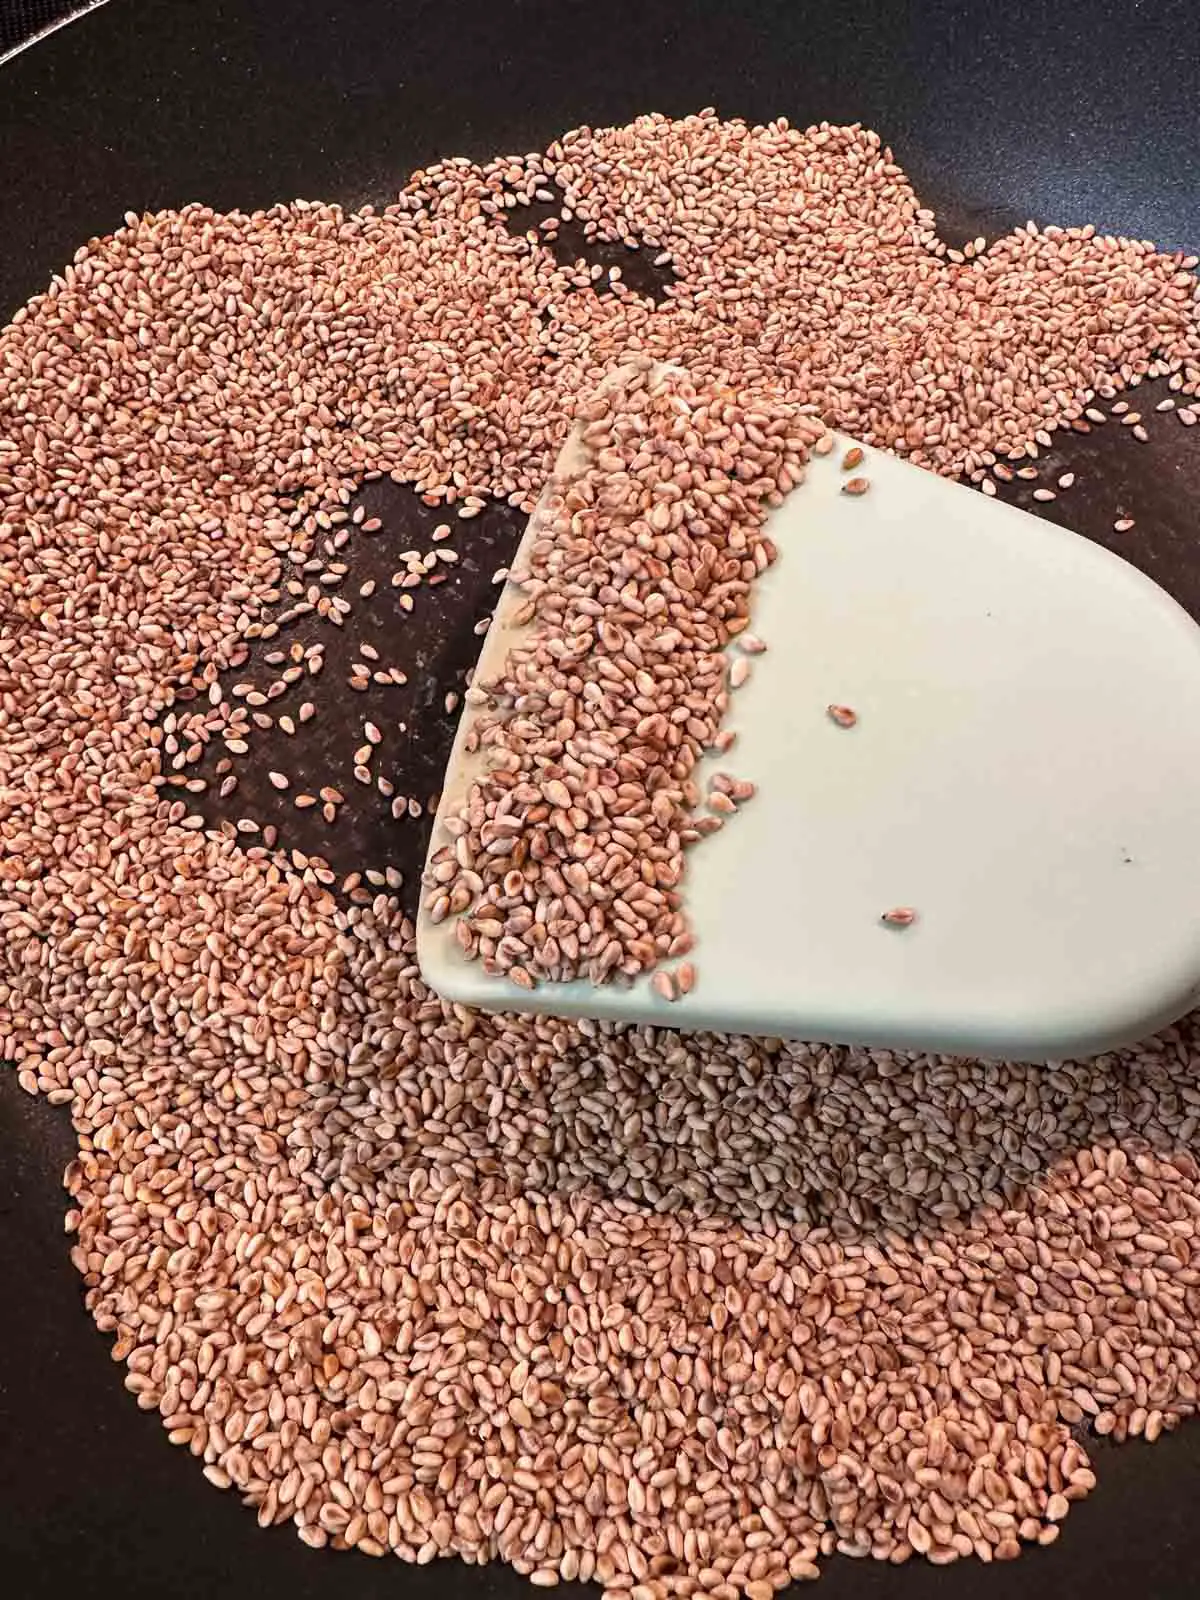 Toasted sesame seeds in a pan with a blue spatula holding some of the sesame seeds.